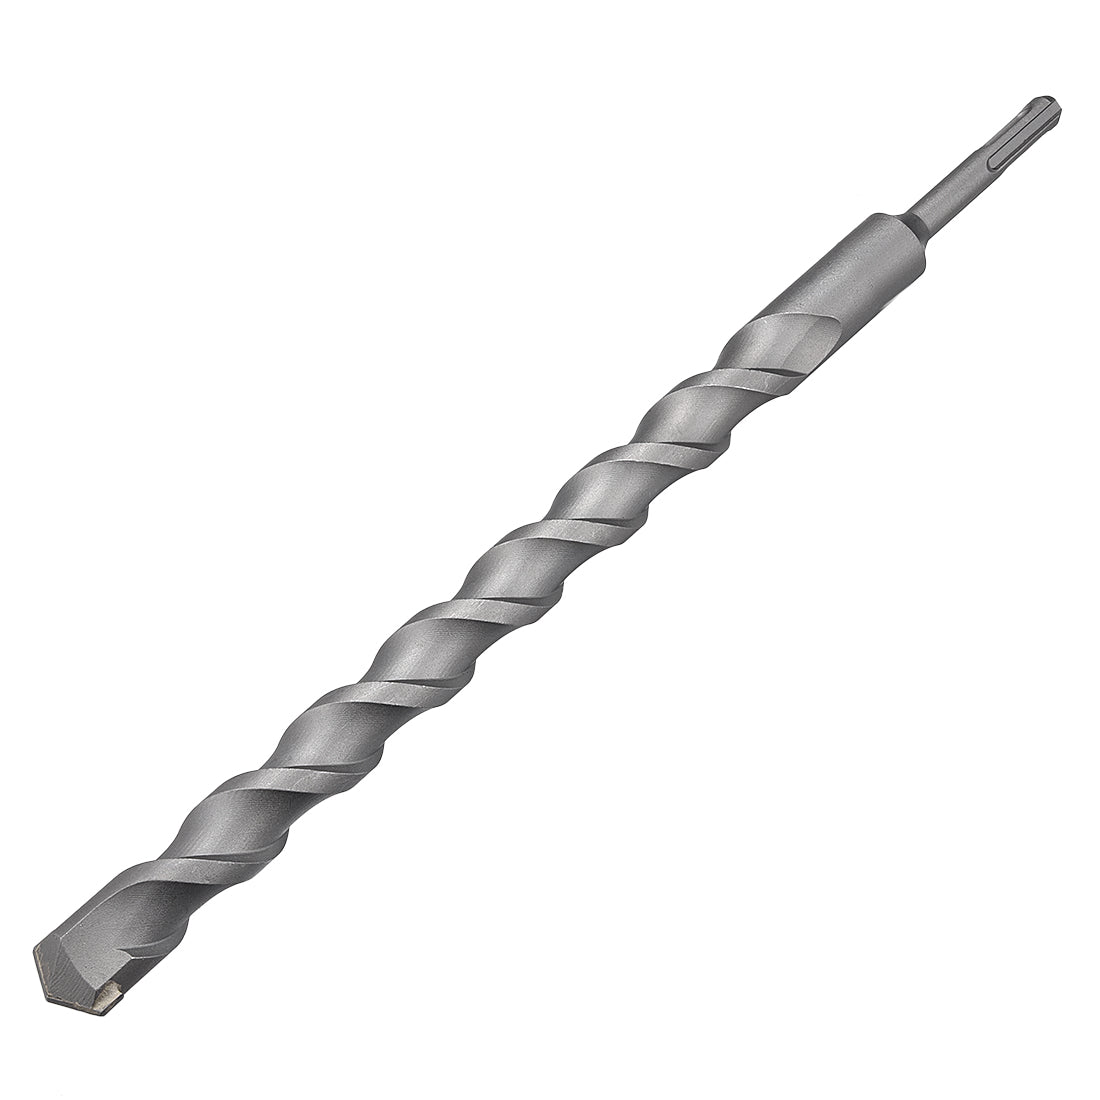 uxcell Uxcell Masonry Drill Bit 25mmx350mm 10mm Round Shank for Impact Drill